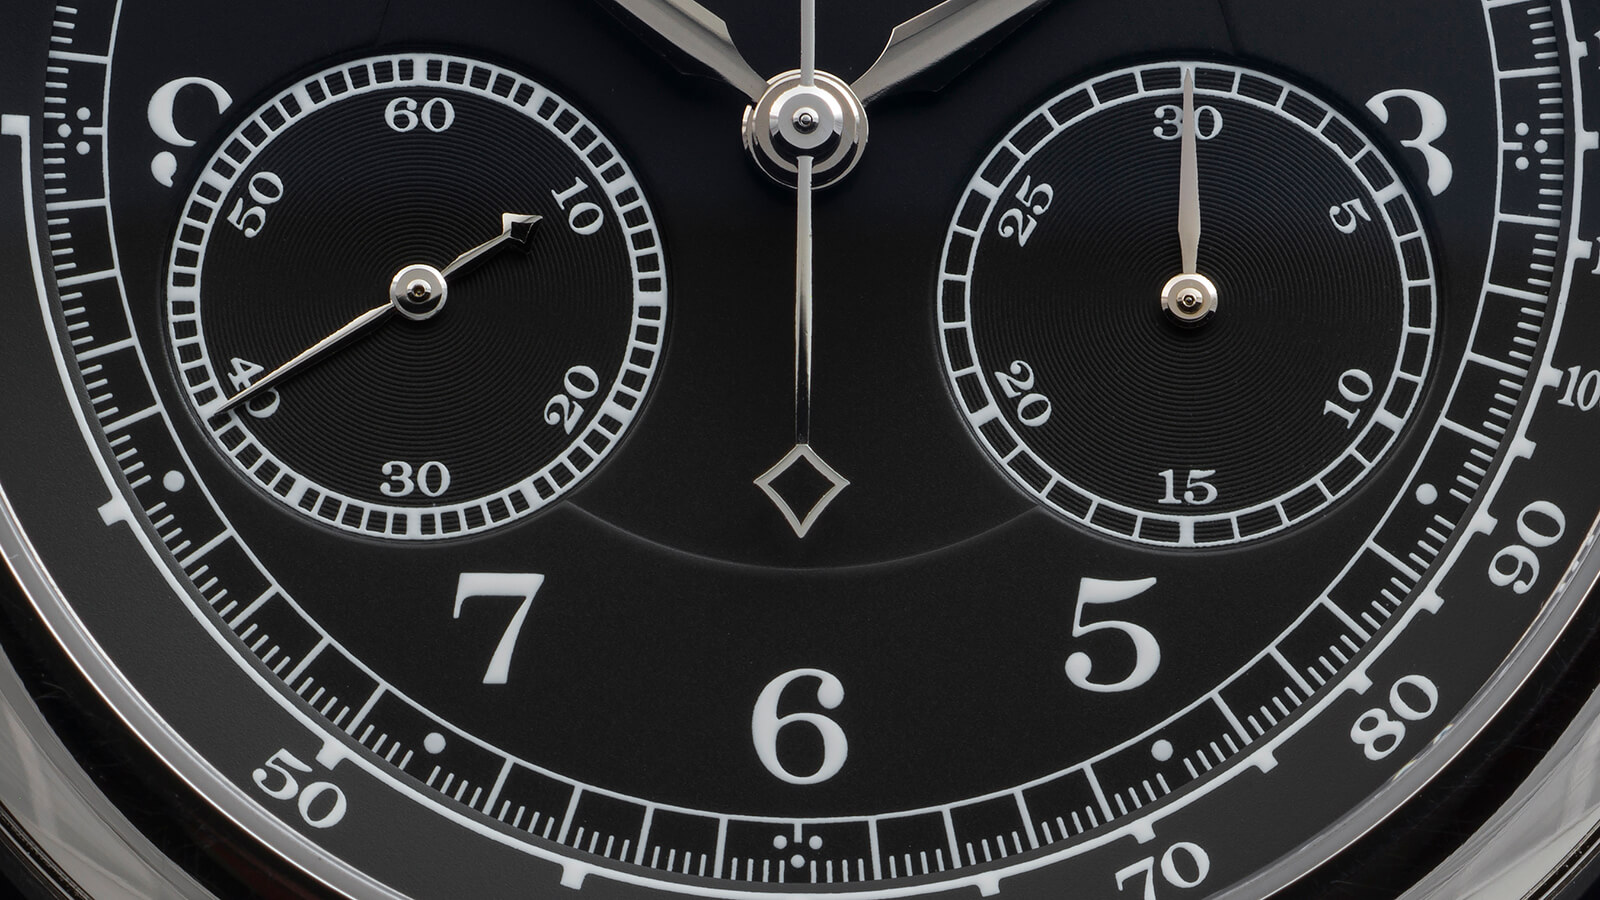 Feeling groovy: dial detail, A. Lange & Söhne 1815 Chronograph